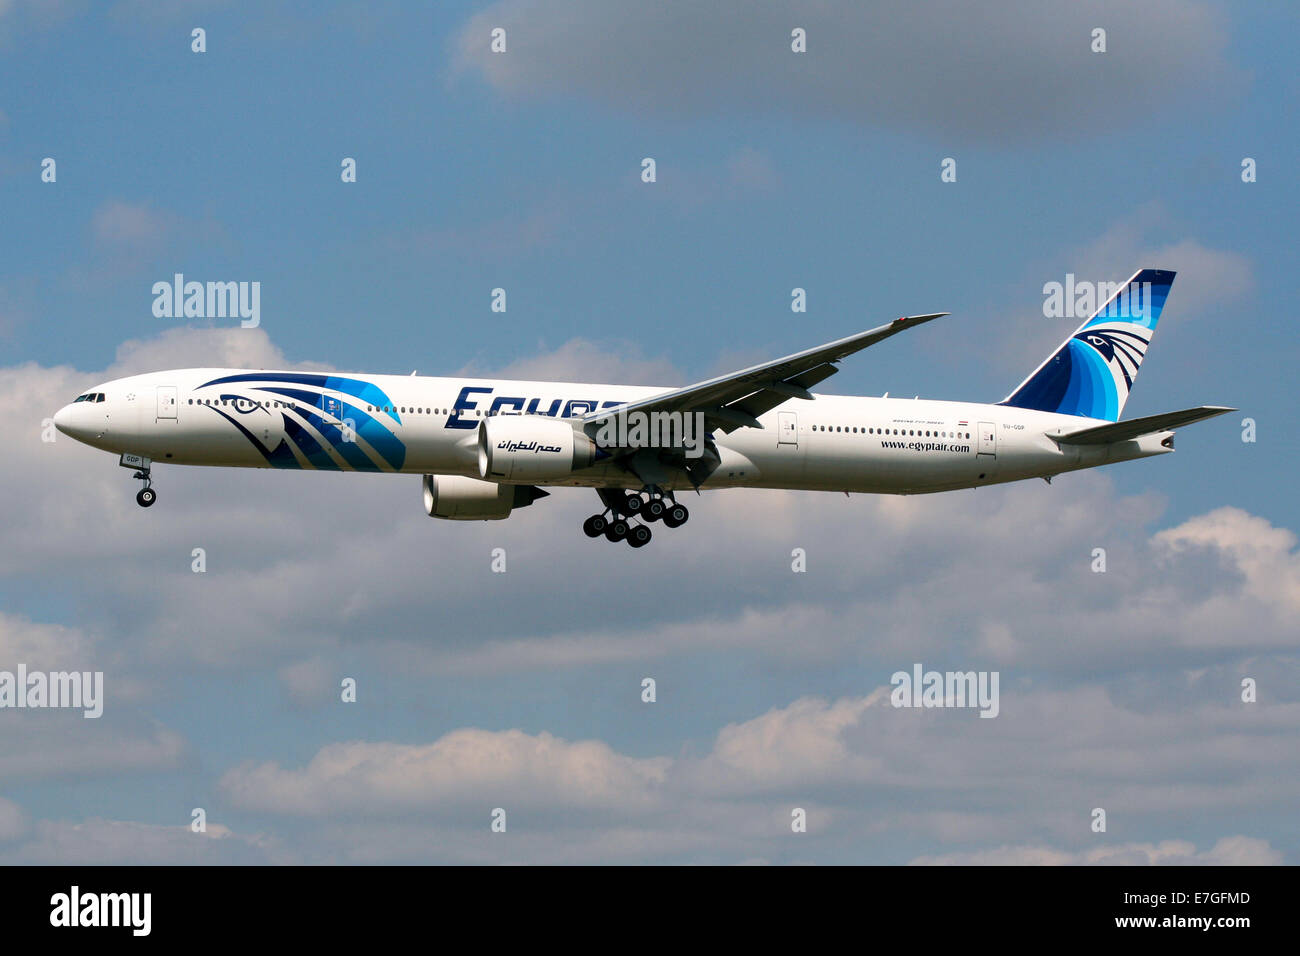 Egyptair Boeing 777-300 approaches runway 27L at London Heathrow airport. Stock Photo